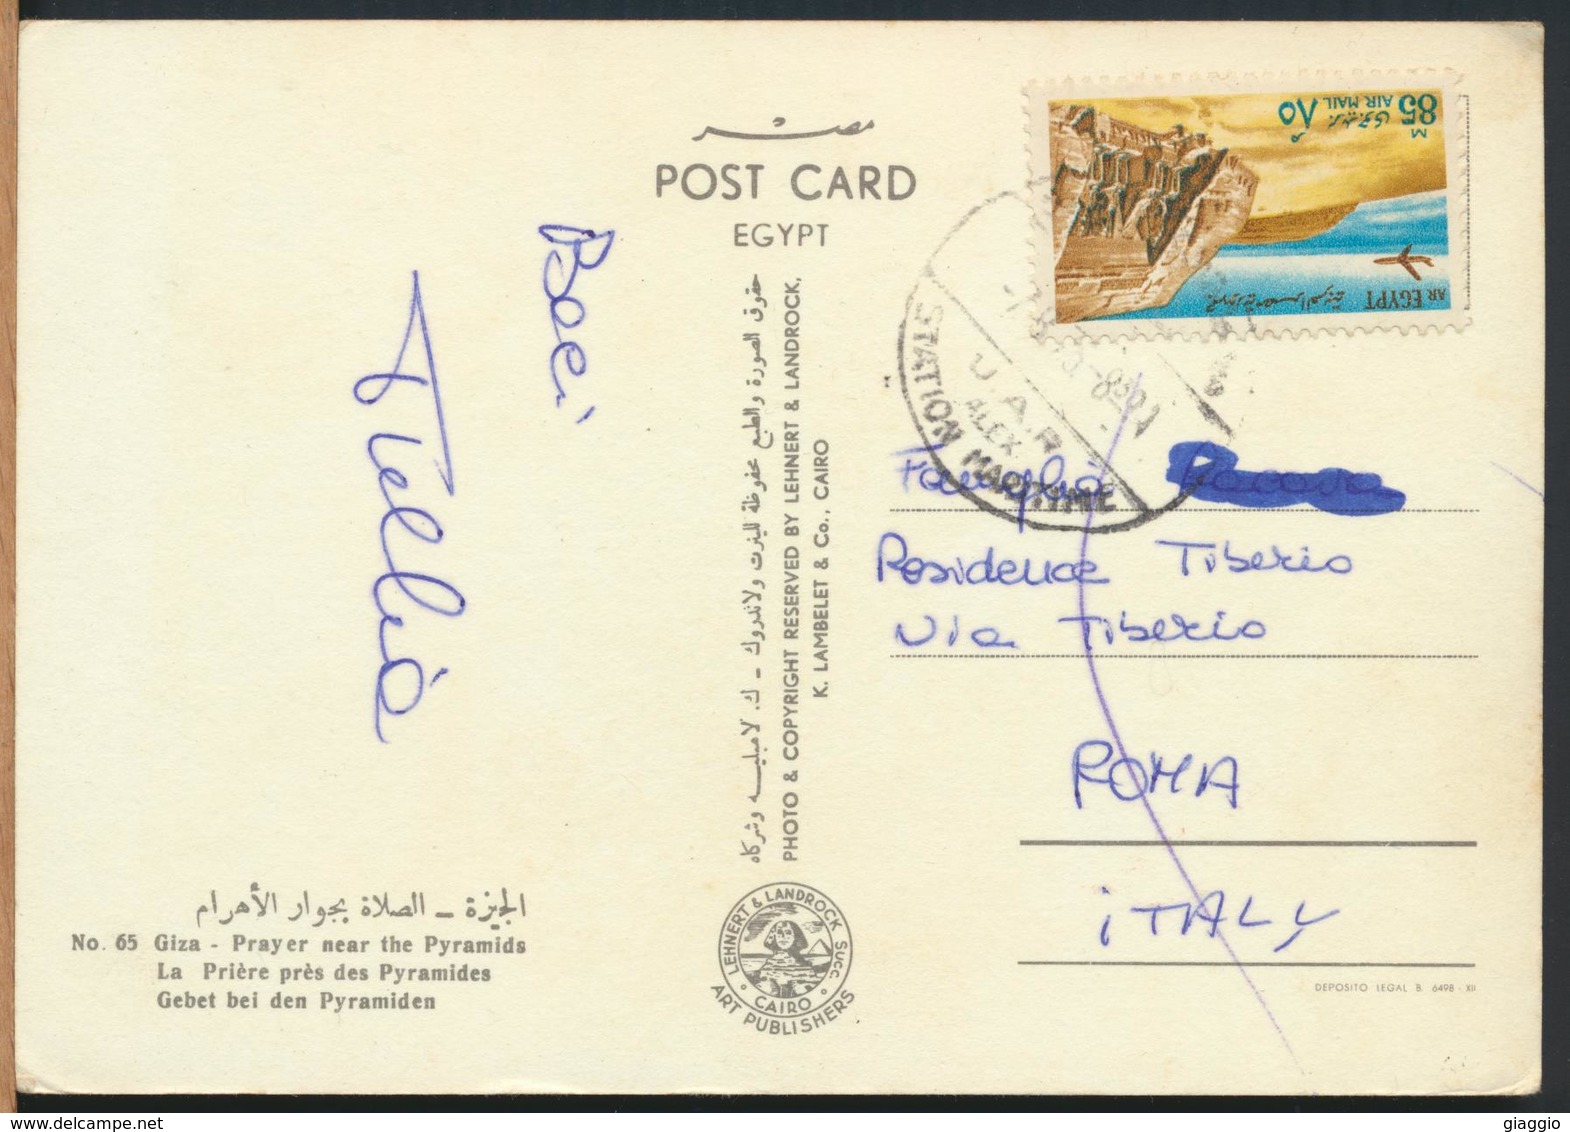 °°° 13131 - EGYPT - GIZA - PRAYER NEAR THE PYRAMIDS - 1979 With Stamps °°° - Gizeh